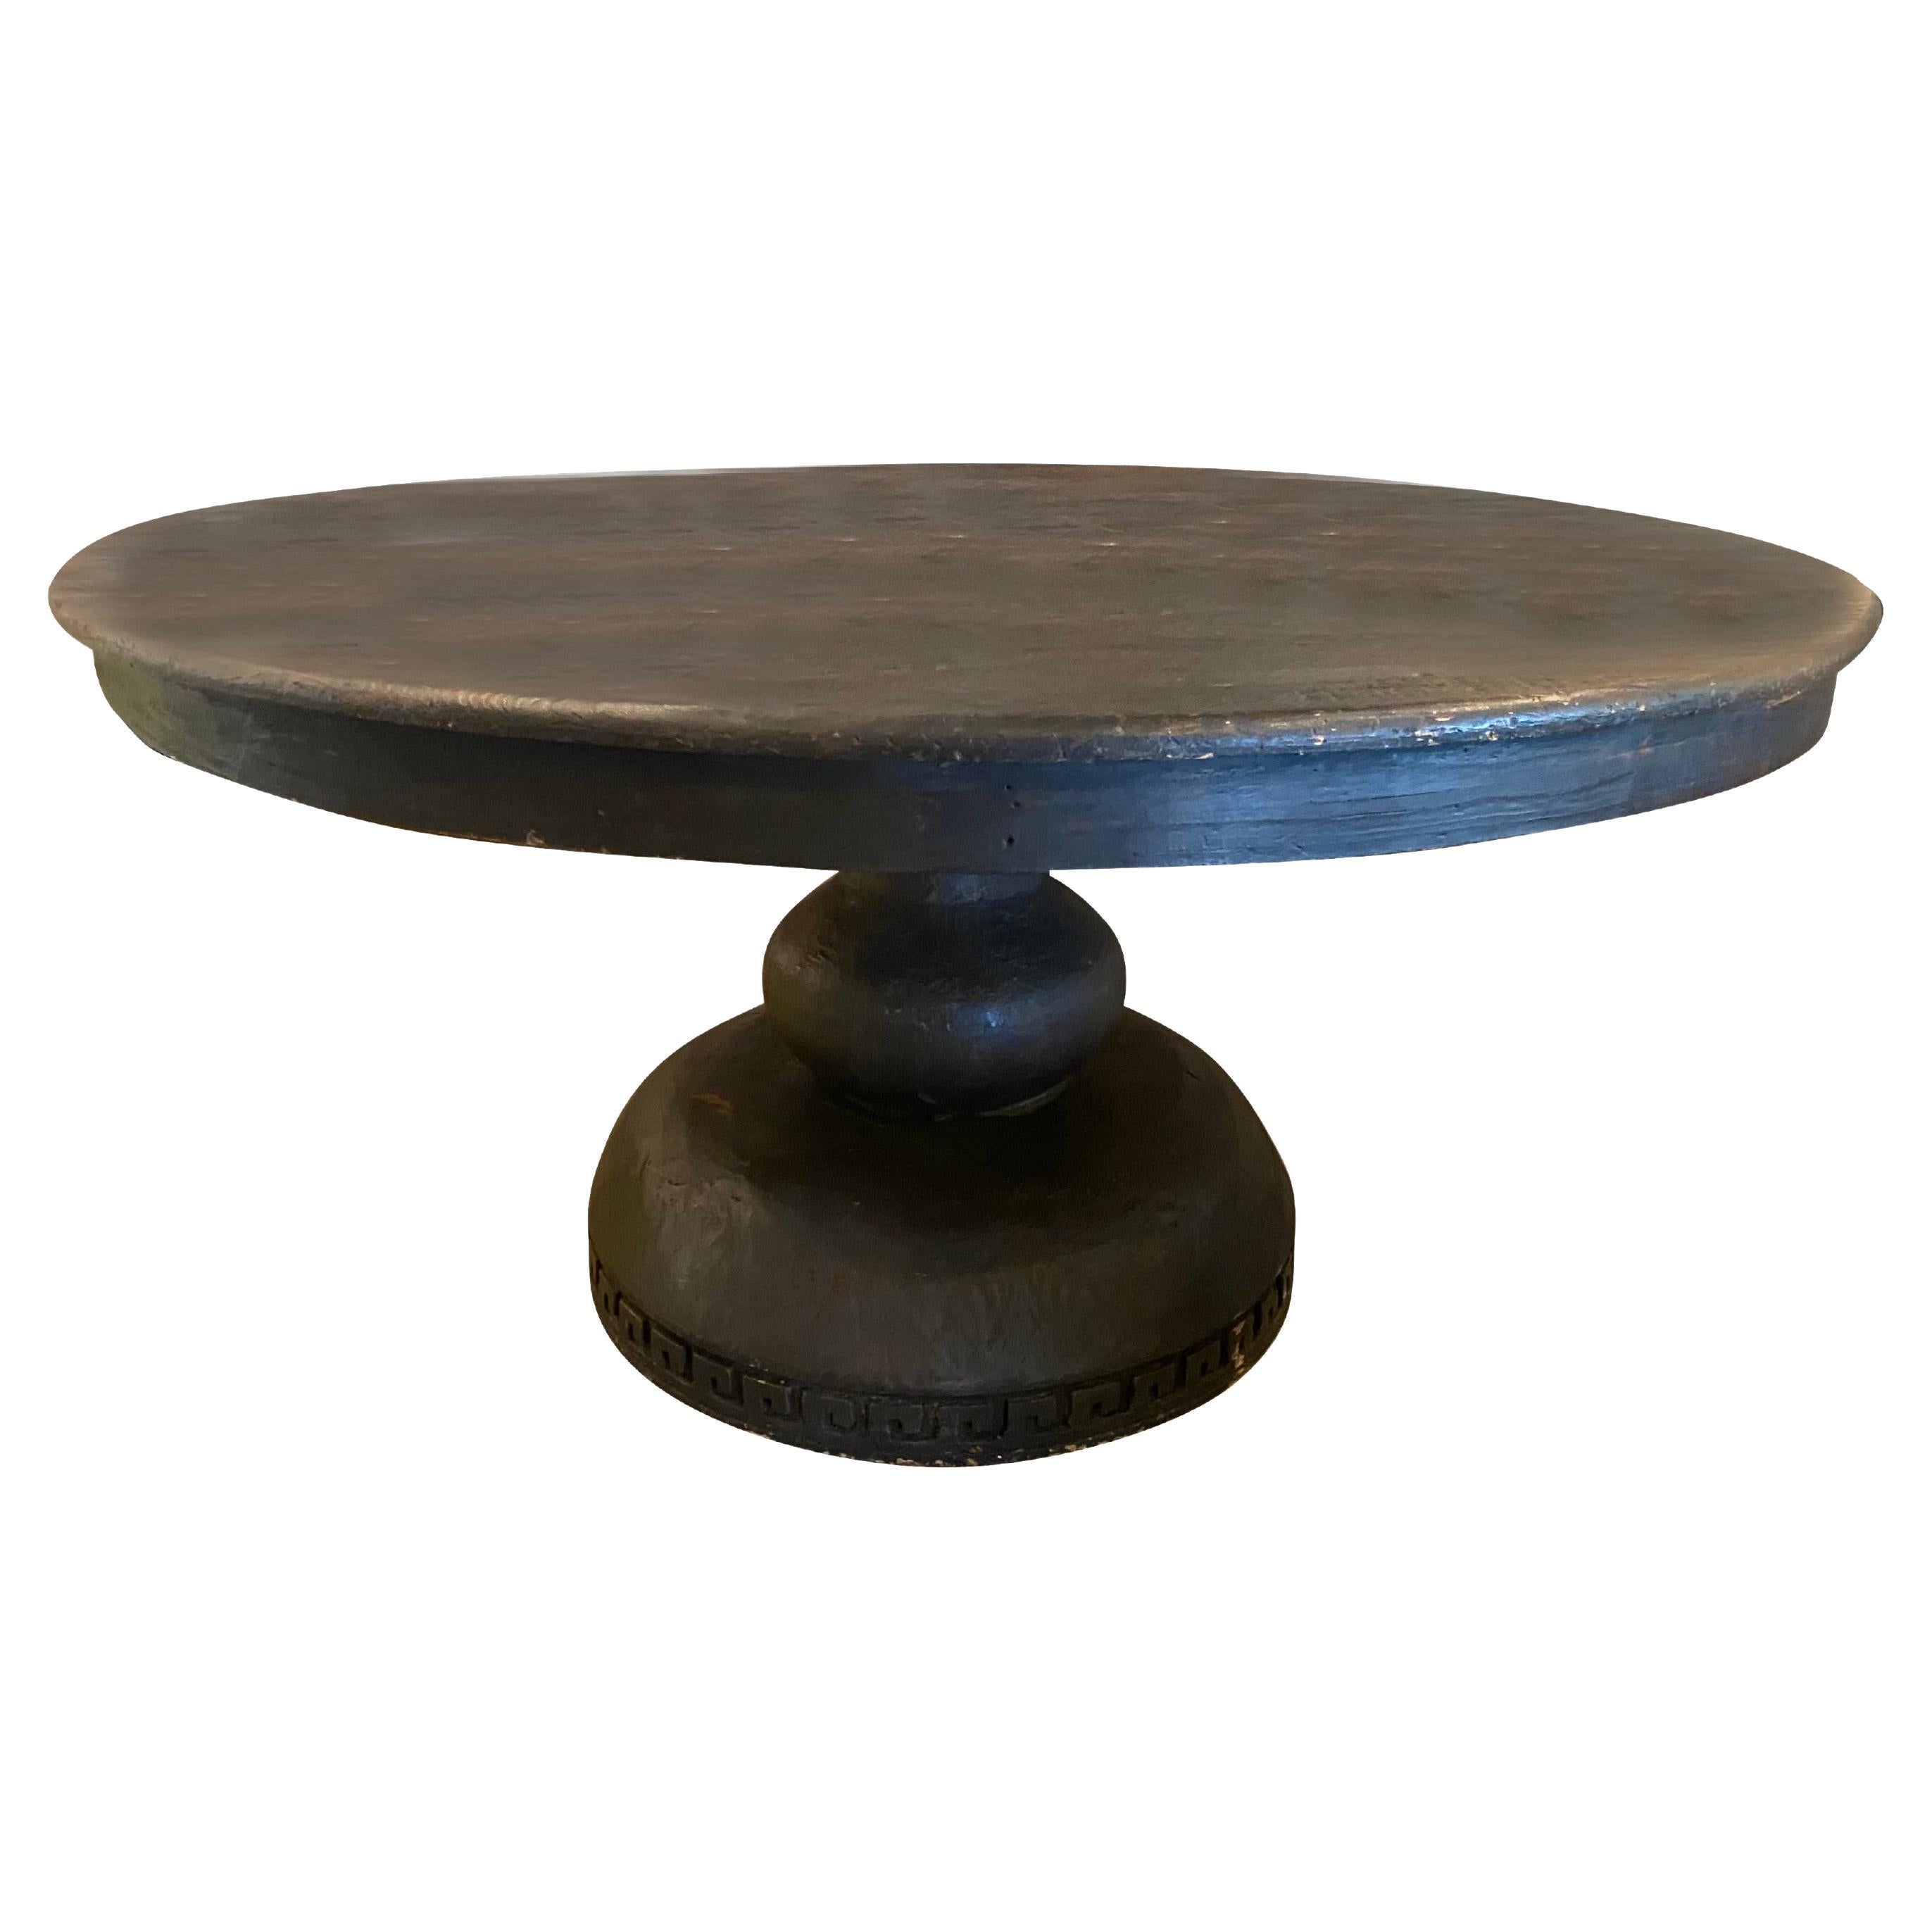 Charcoal Gray Painted Wood Table, France, 19th Century